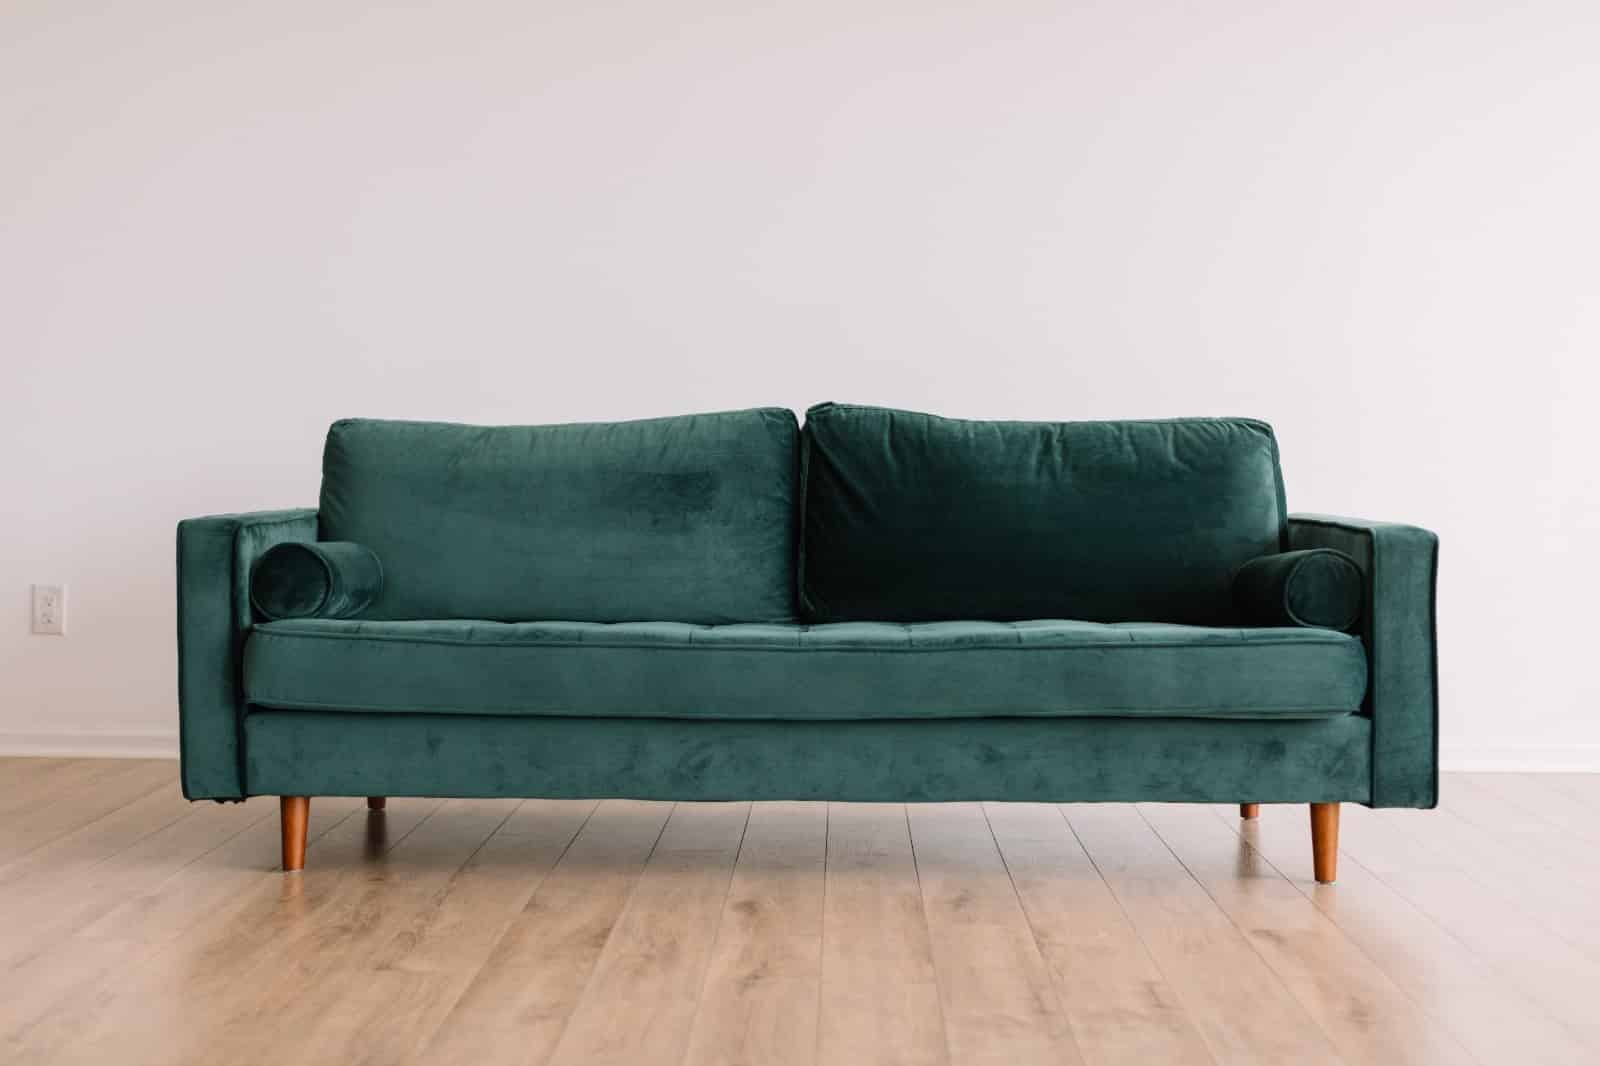 Comfort and Ergonomics Why Investing in Quality Furniture Matters - 2